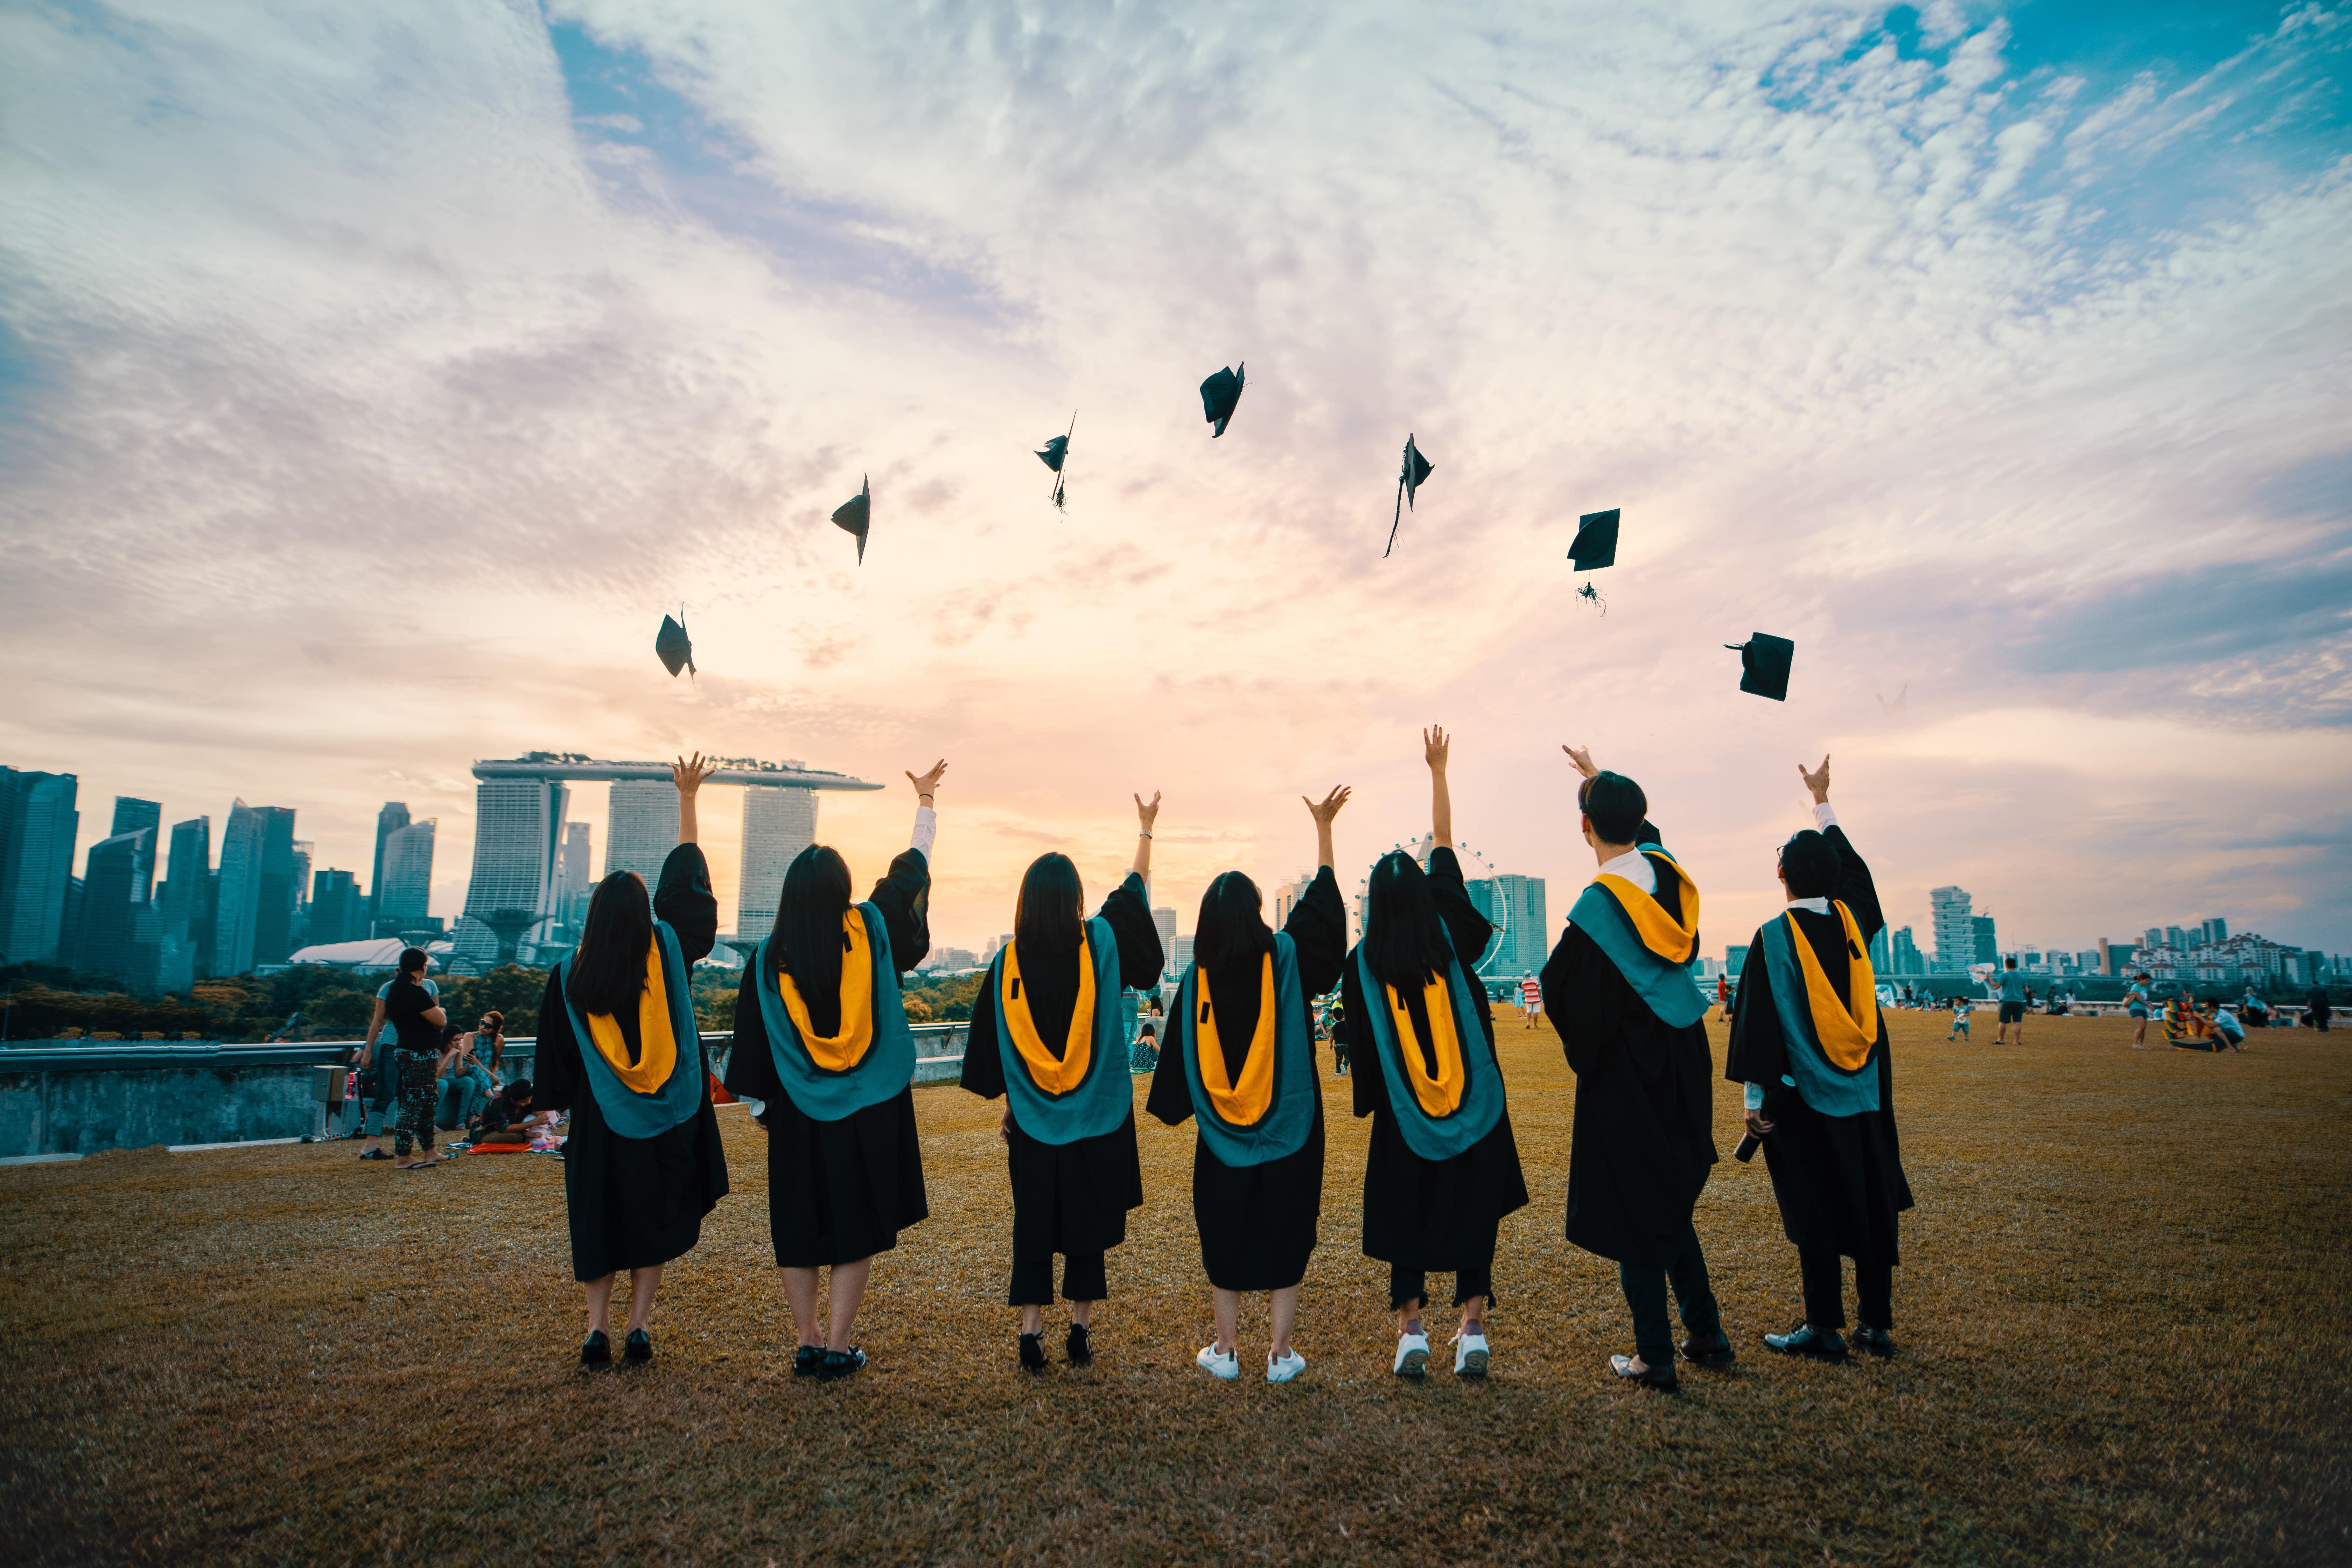 Recent graduates throwing their caps into the air in front of a city backdrop